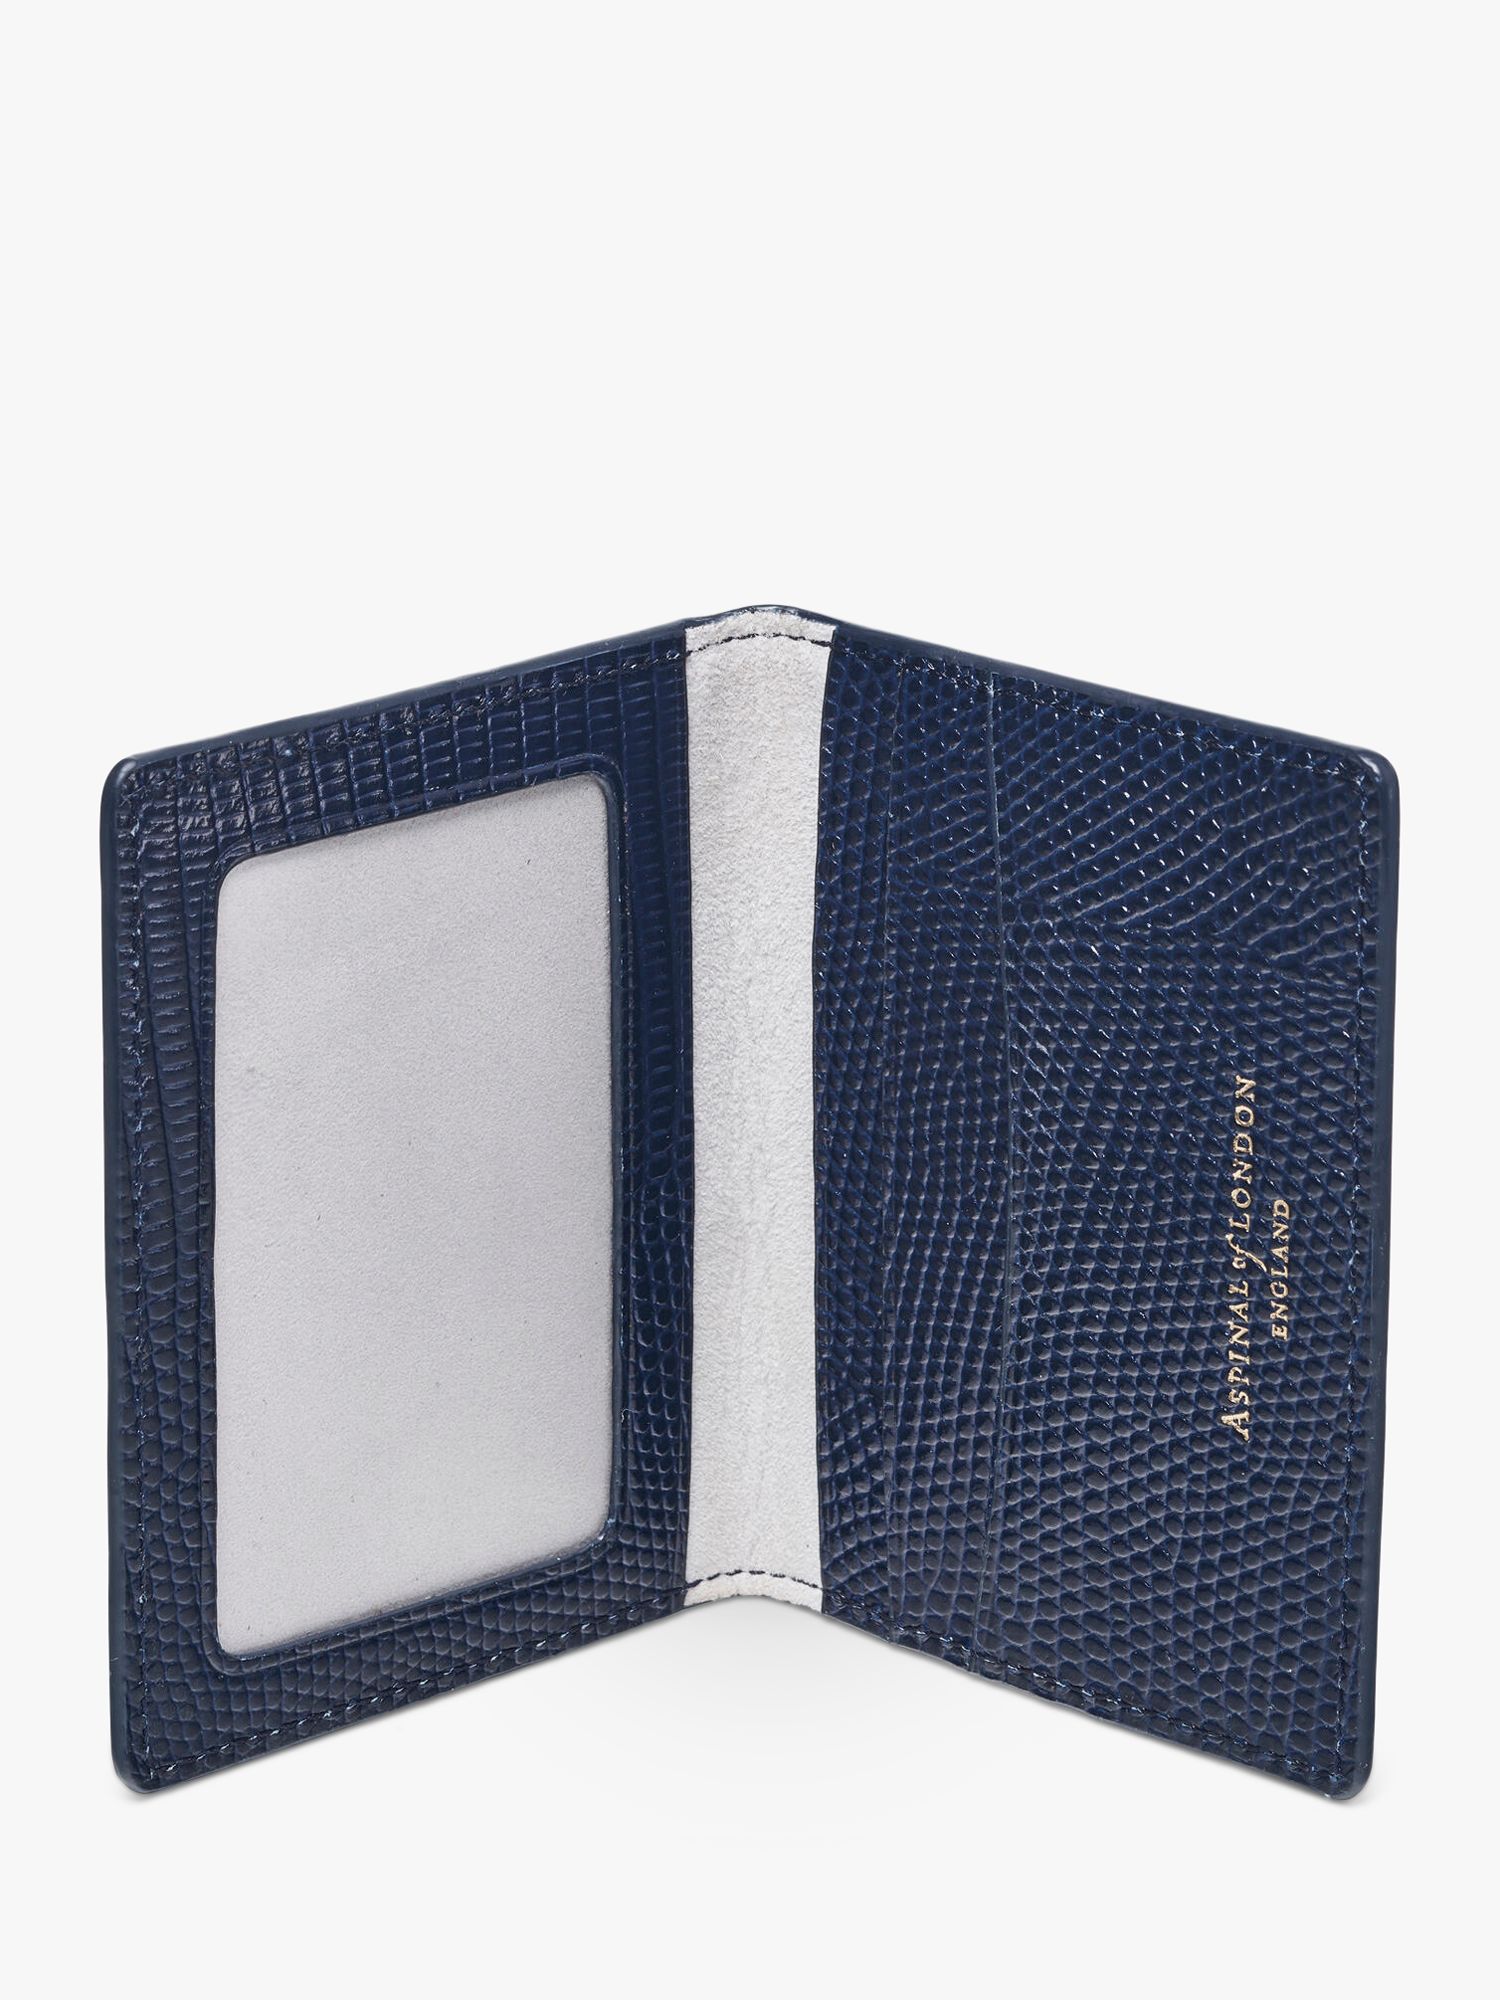 Aspinal of London Lizard Leather ID & Travel Card Case, Midnight Blue